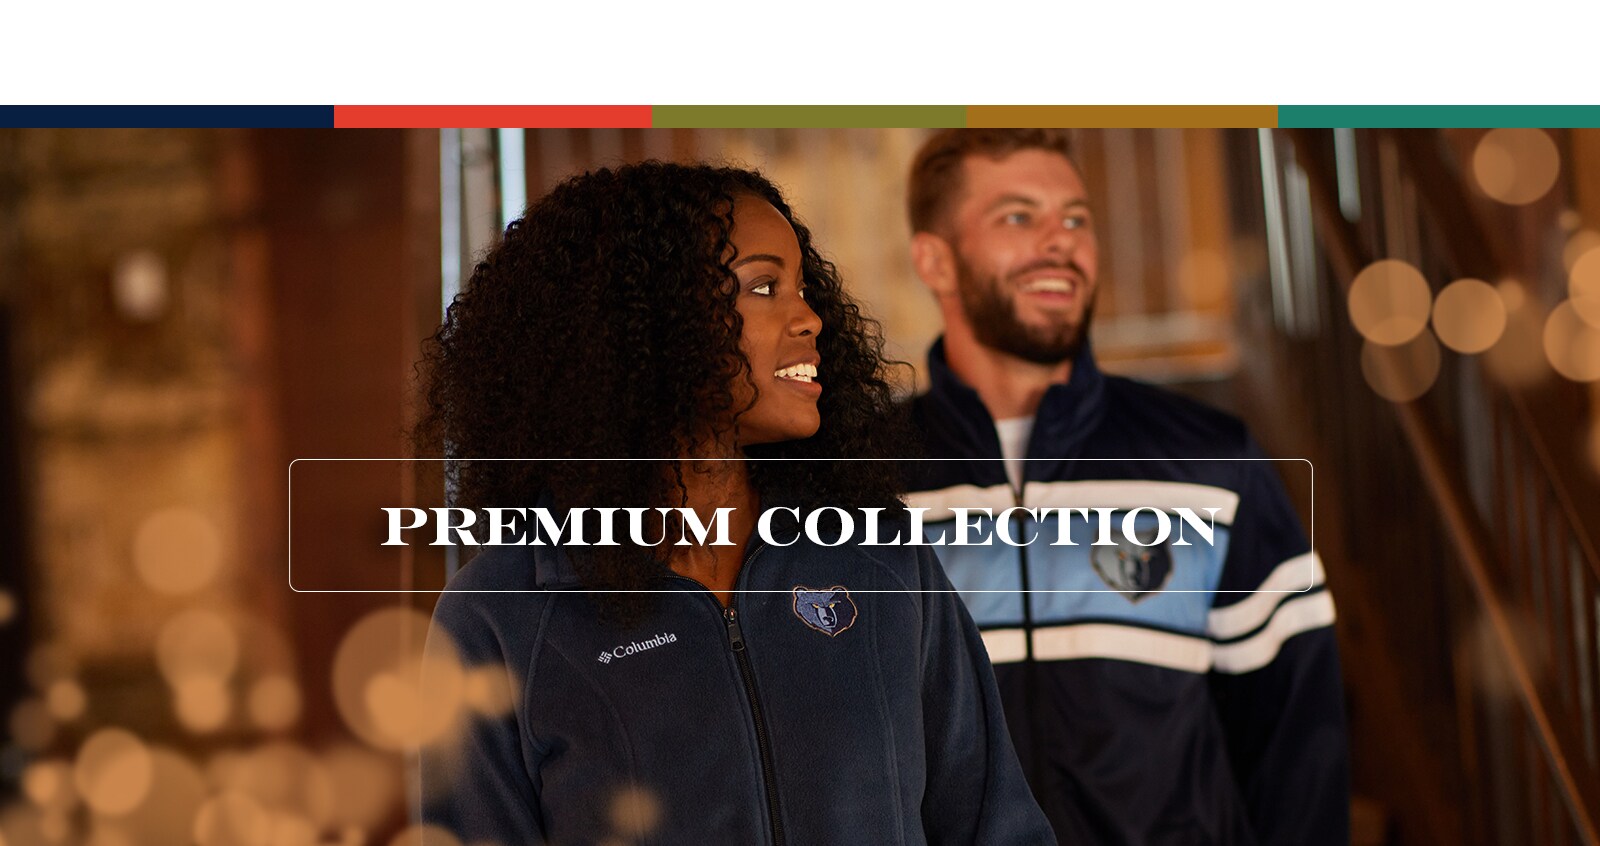 PREMIUM COLLECTION BRANDS FOR CHRISTMAS